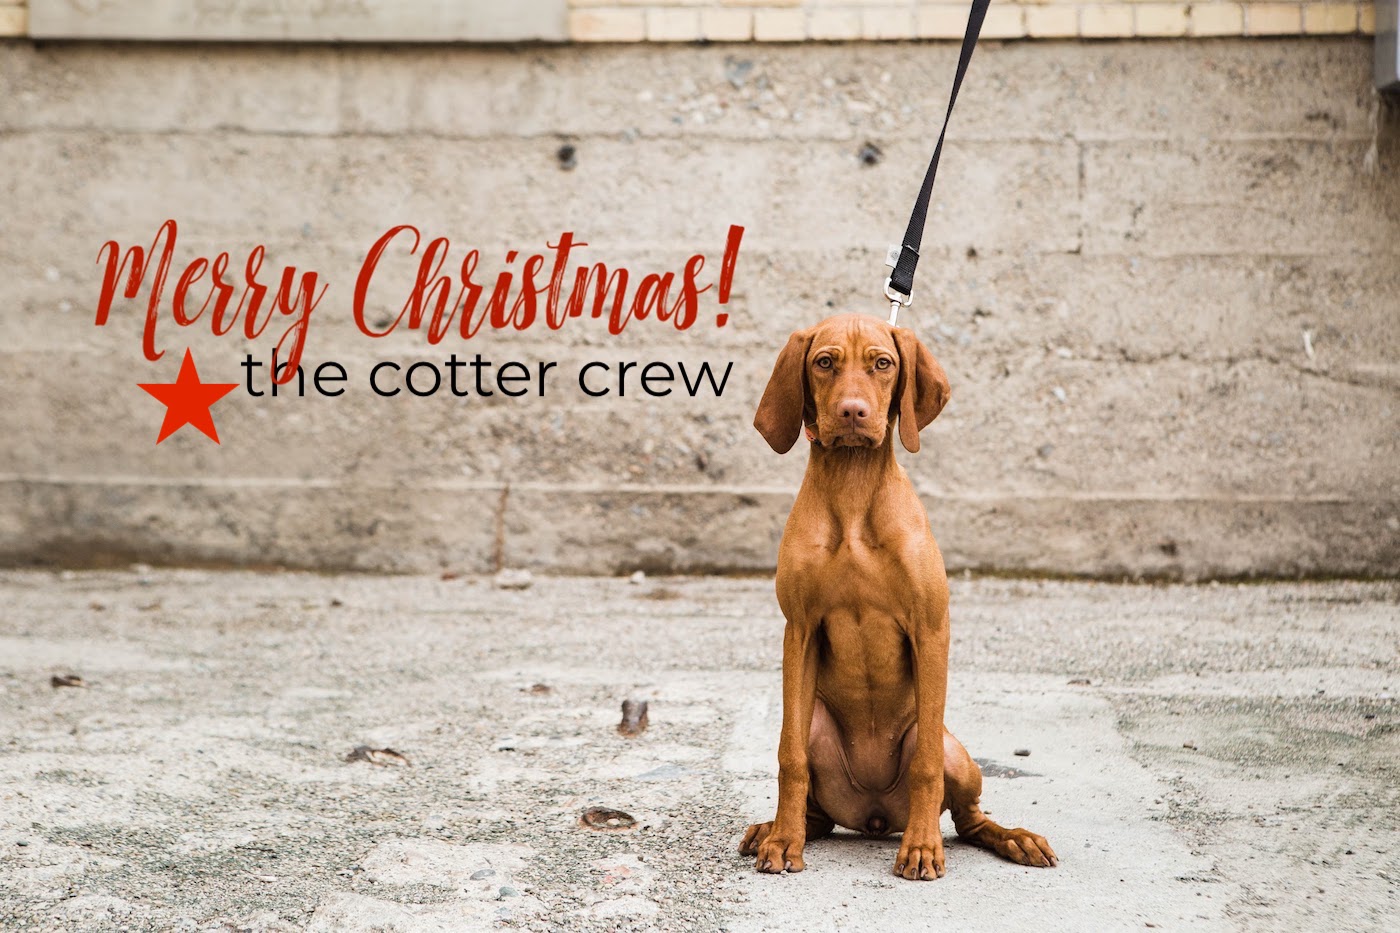 A vizsla puppy on a leash against concrete background, text overlay with "Merry Christmas, the Cotter Crew".